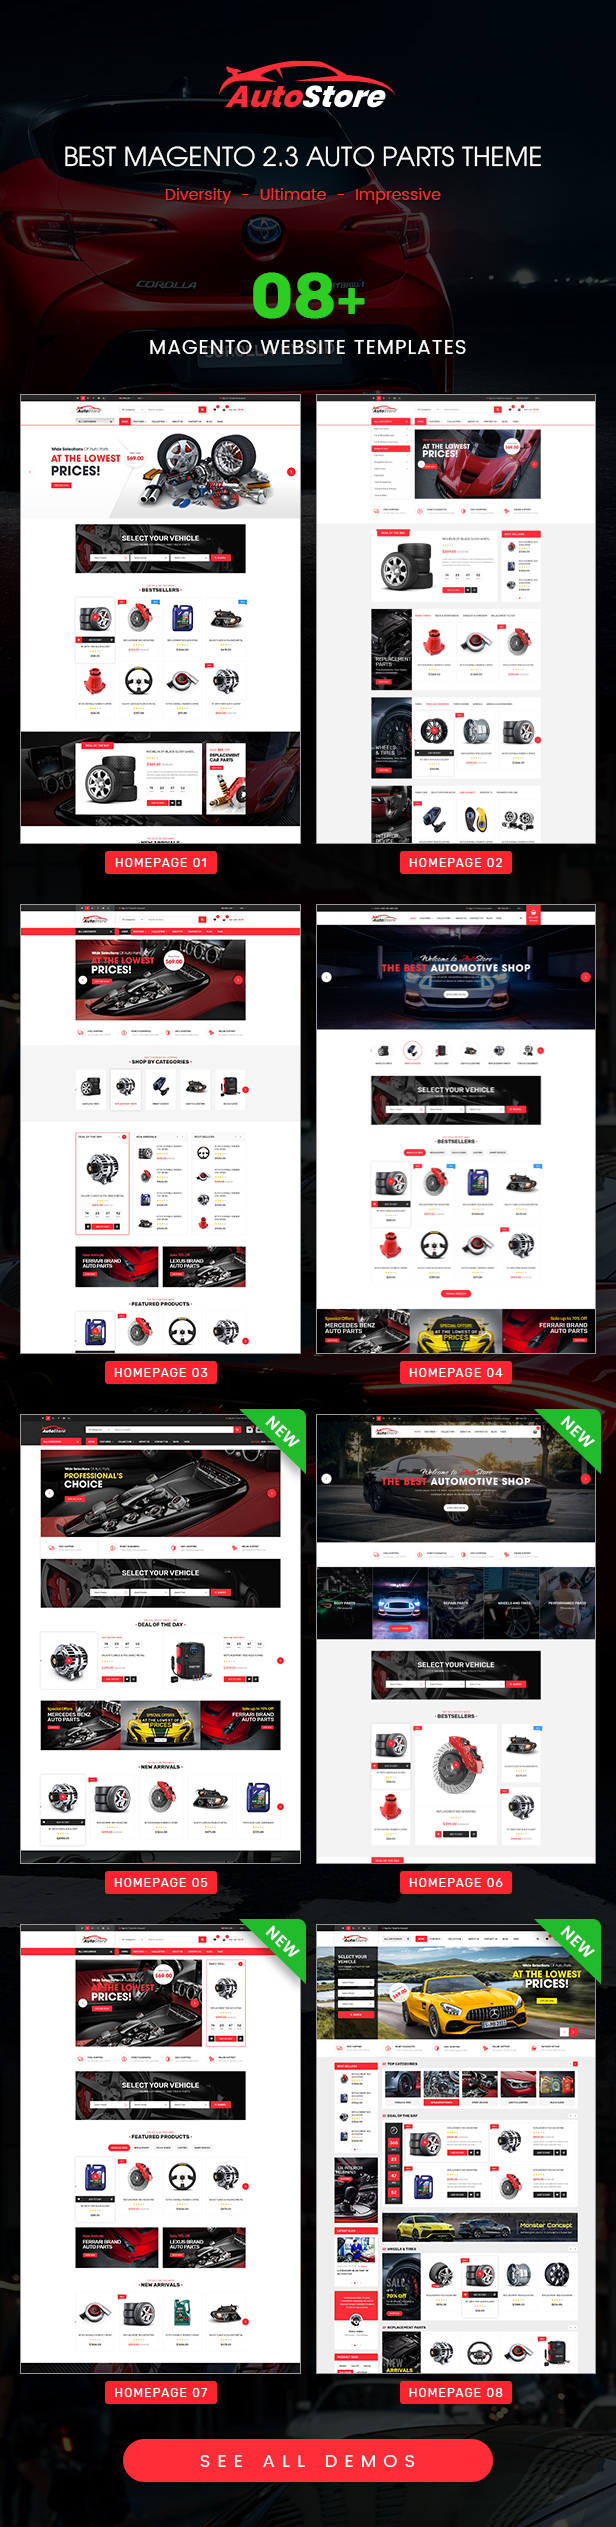 AutoStore - Auto Parts and Equipments Magento 2 Theme with Ajax Attributes Search Module - 5